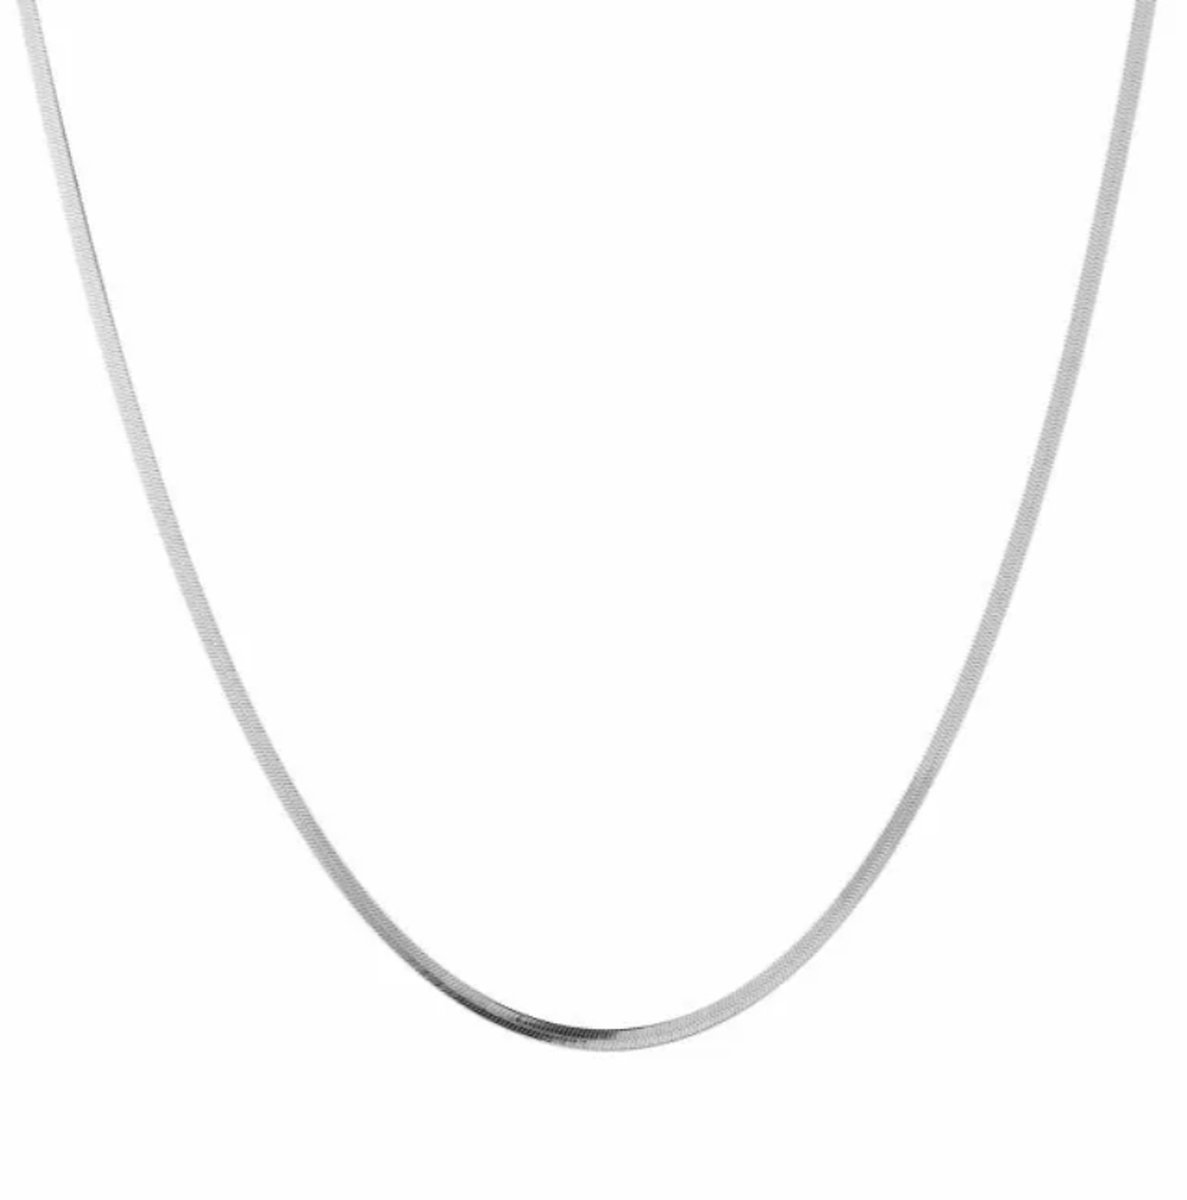 Classic- snake- ketting - roestvrij staal- stainless steel- zilver- 45 cm